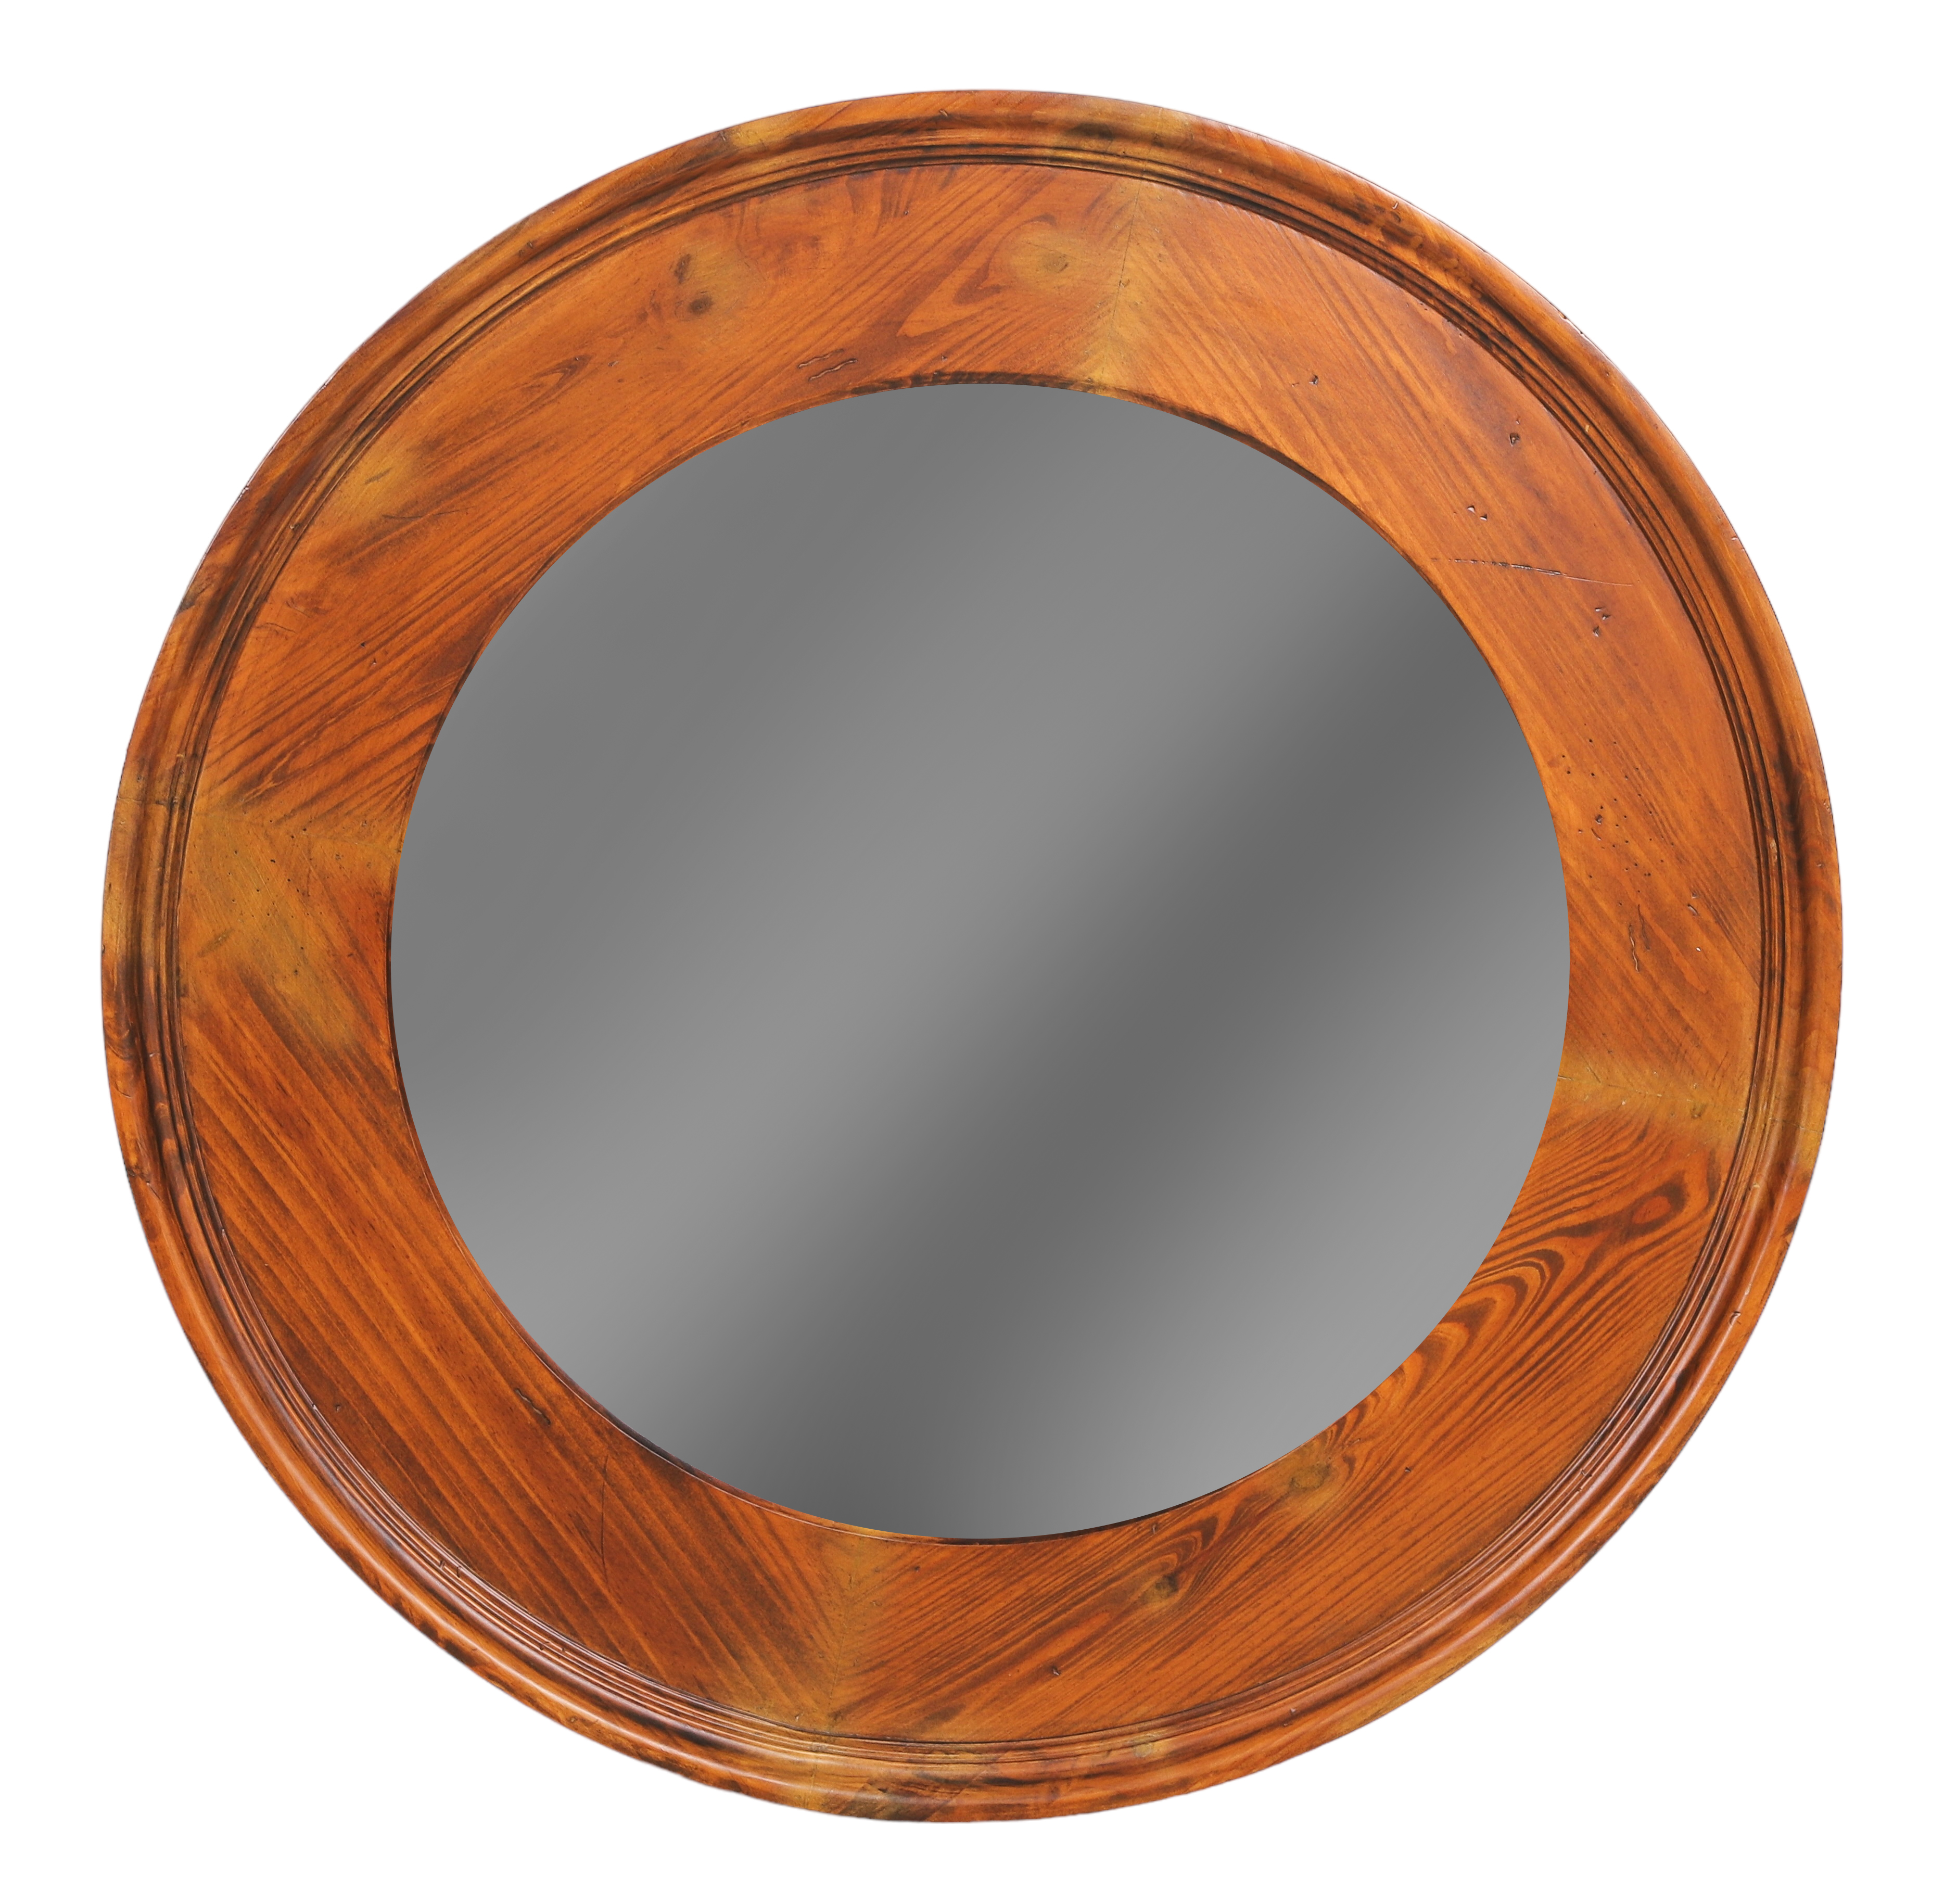 Oak carved round hanging wall mirror,